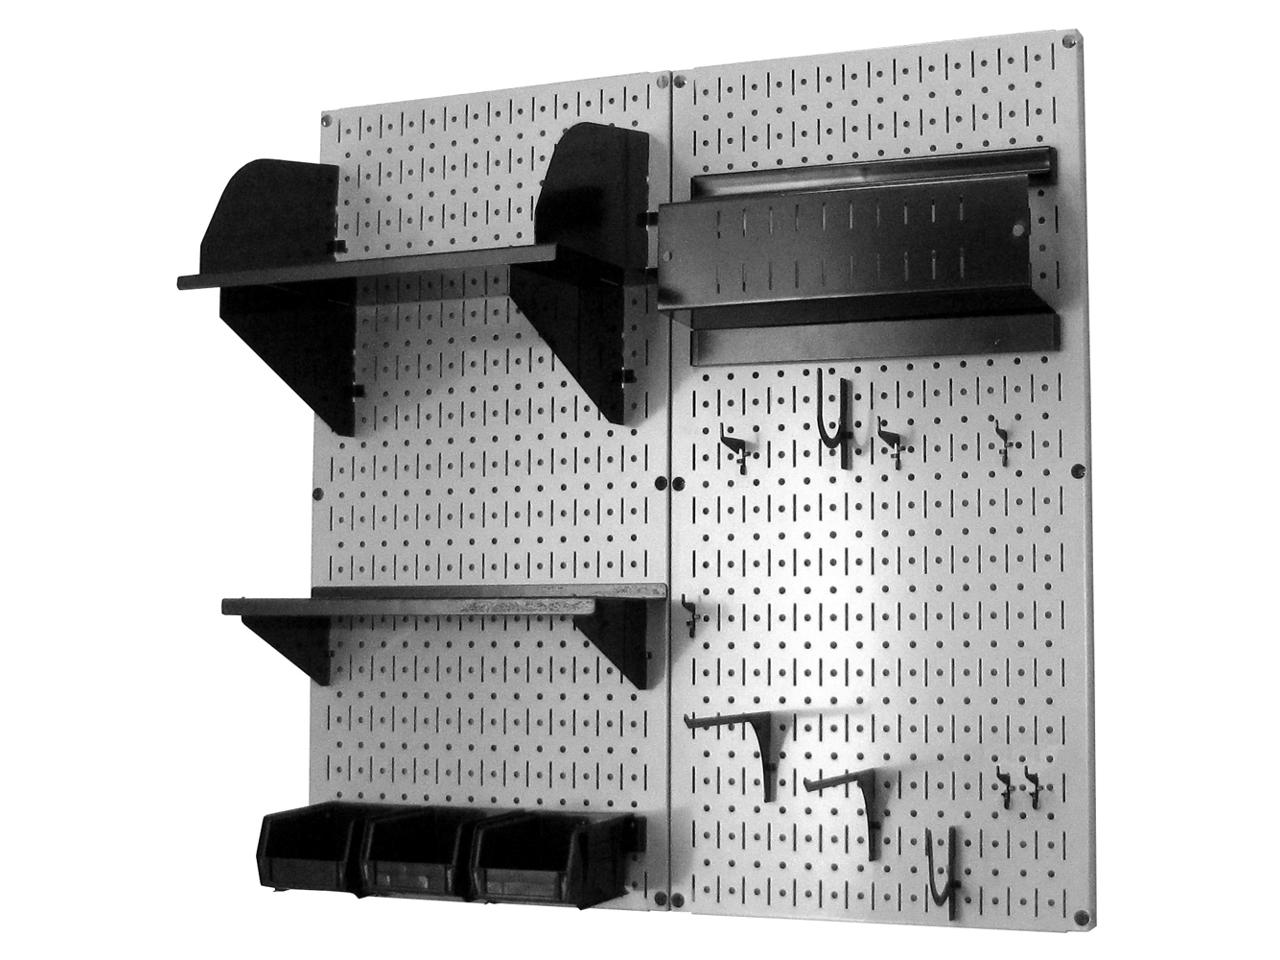 Wall Control Pegboard Hobby Craft Pegboard Organizer Storage Kit with Gray Pegboard and Black Accessories - image 2 of 6